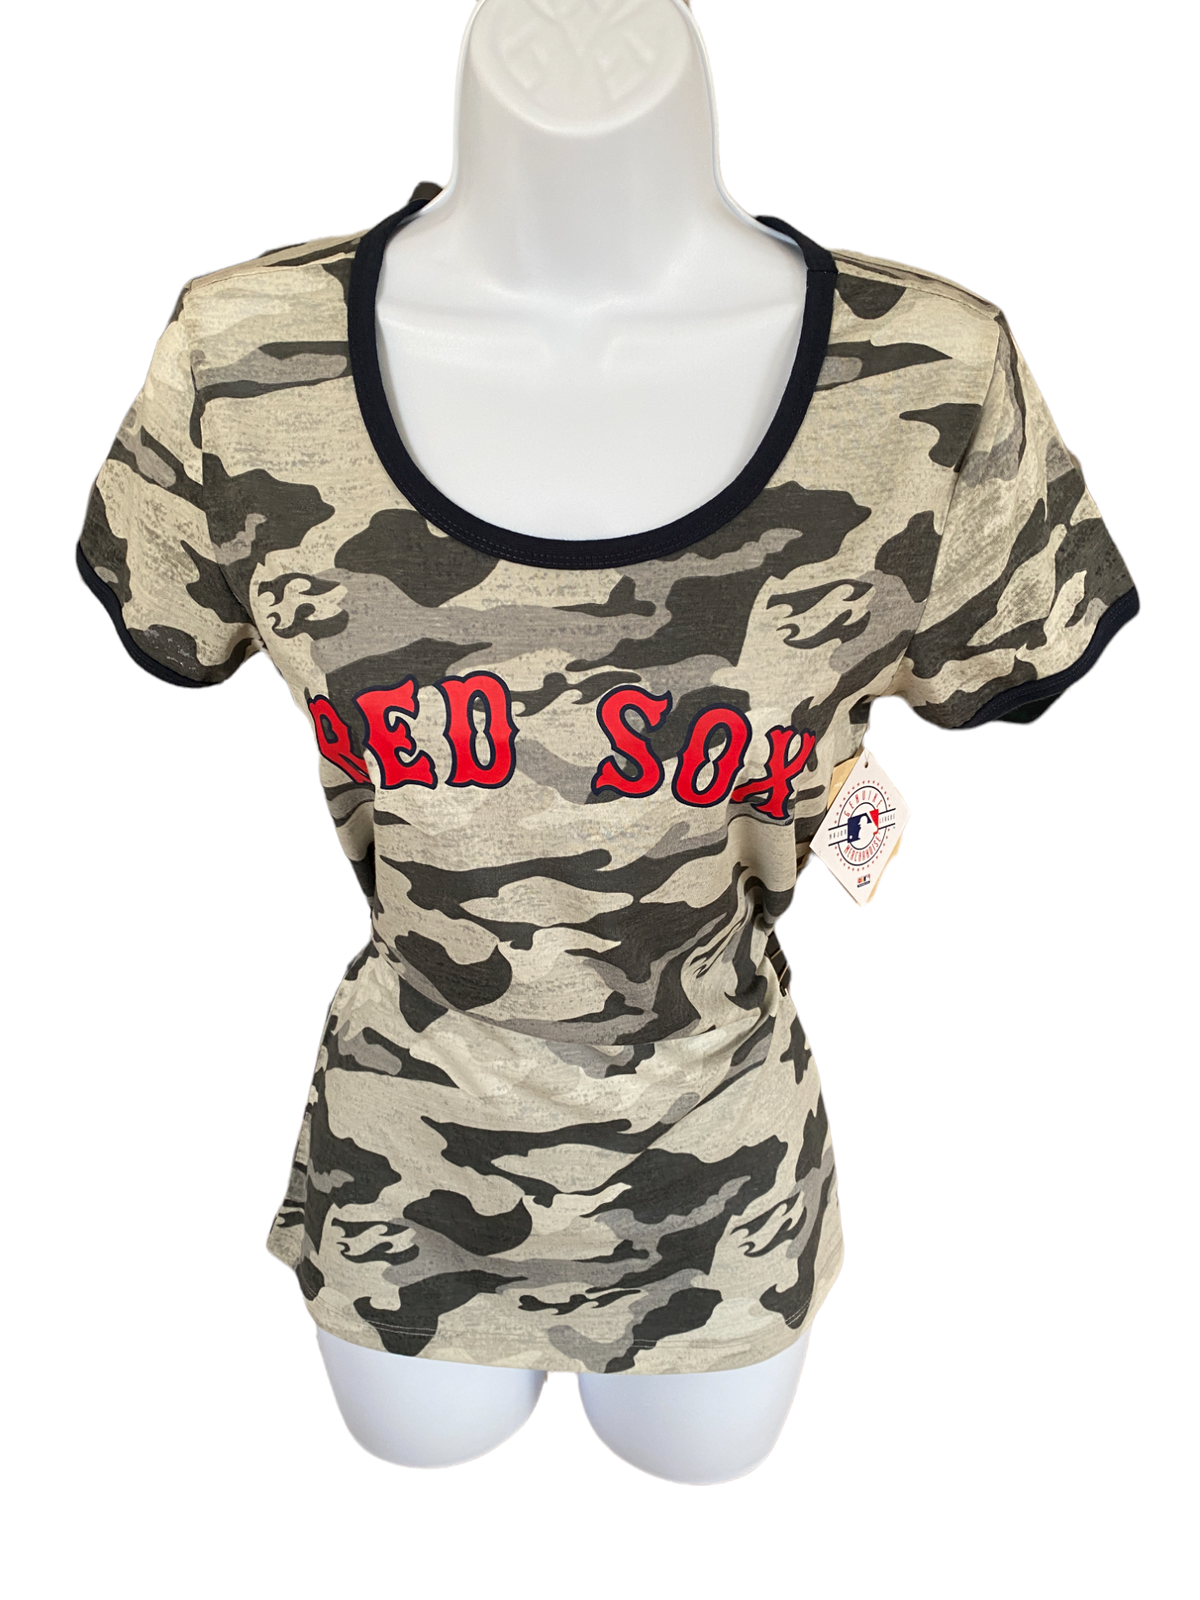 Womens MLB Official Camo Red Sox T-Shirt